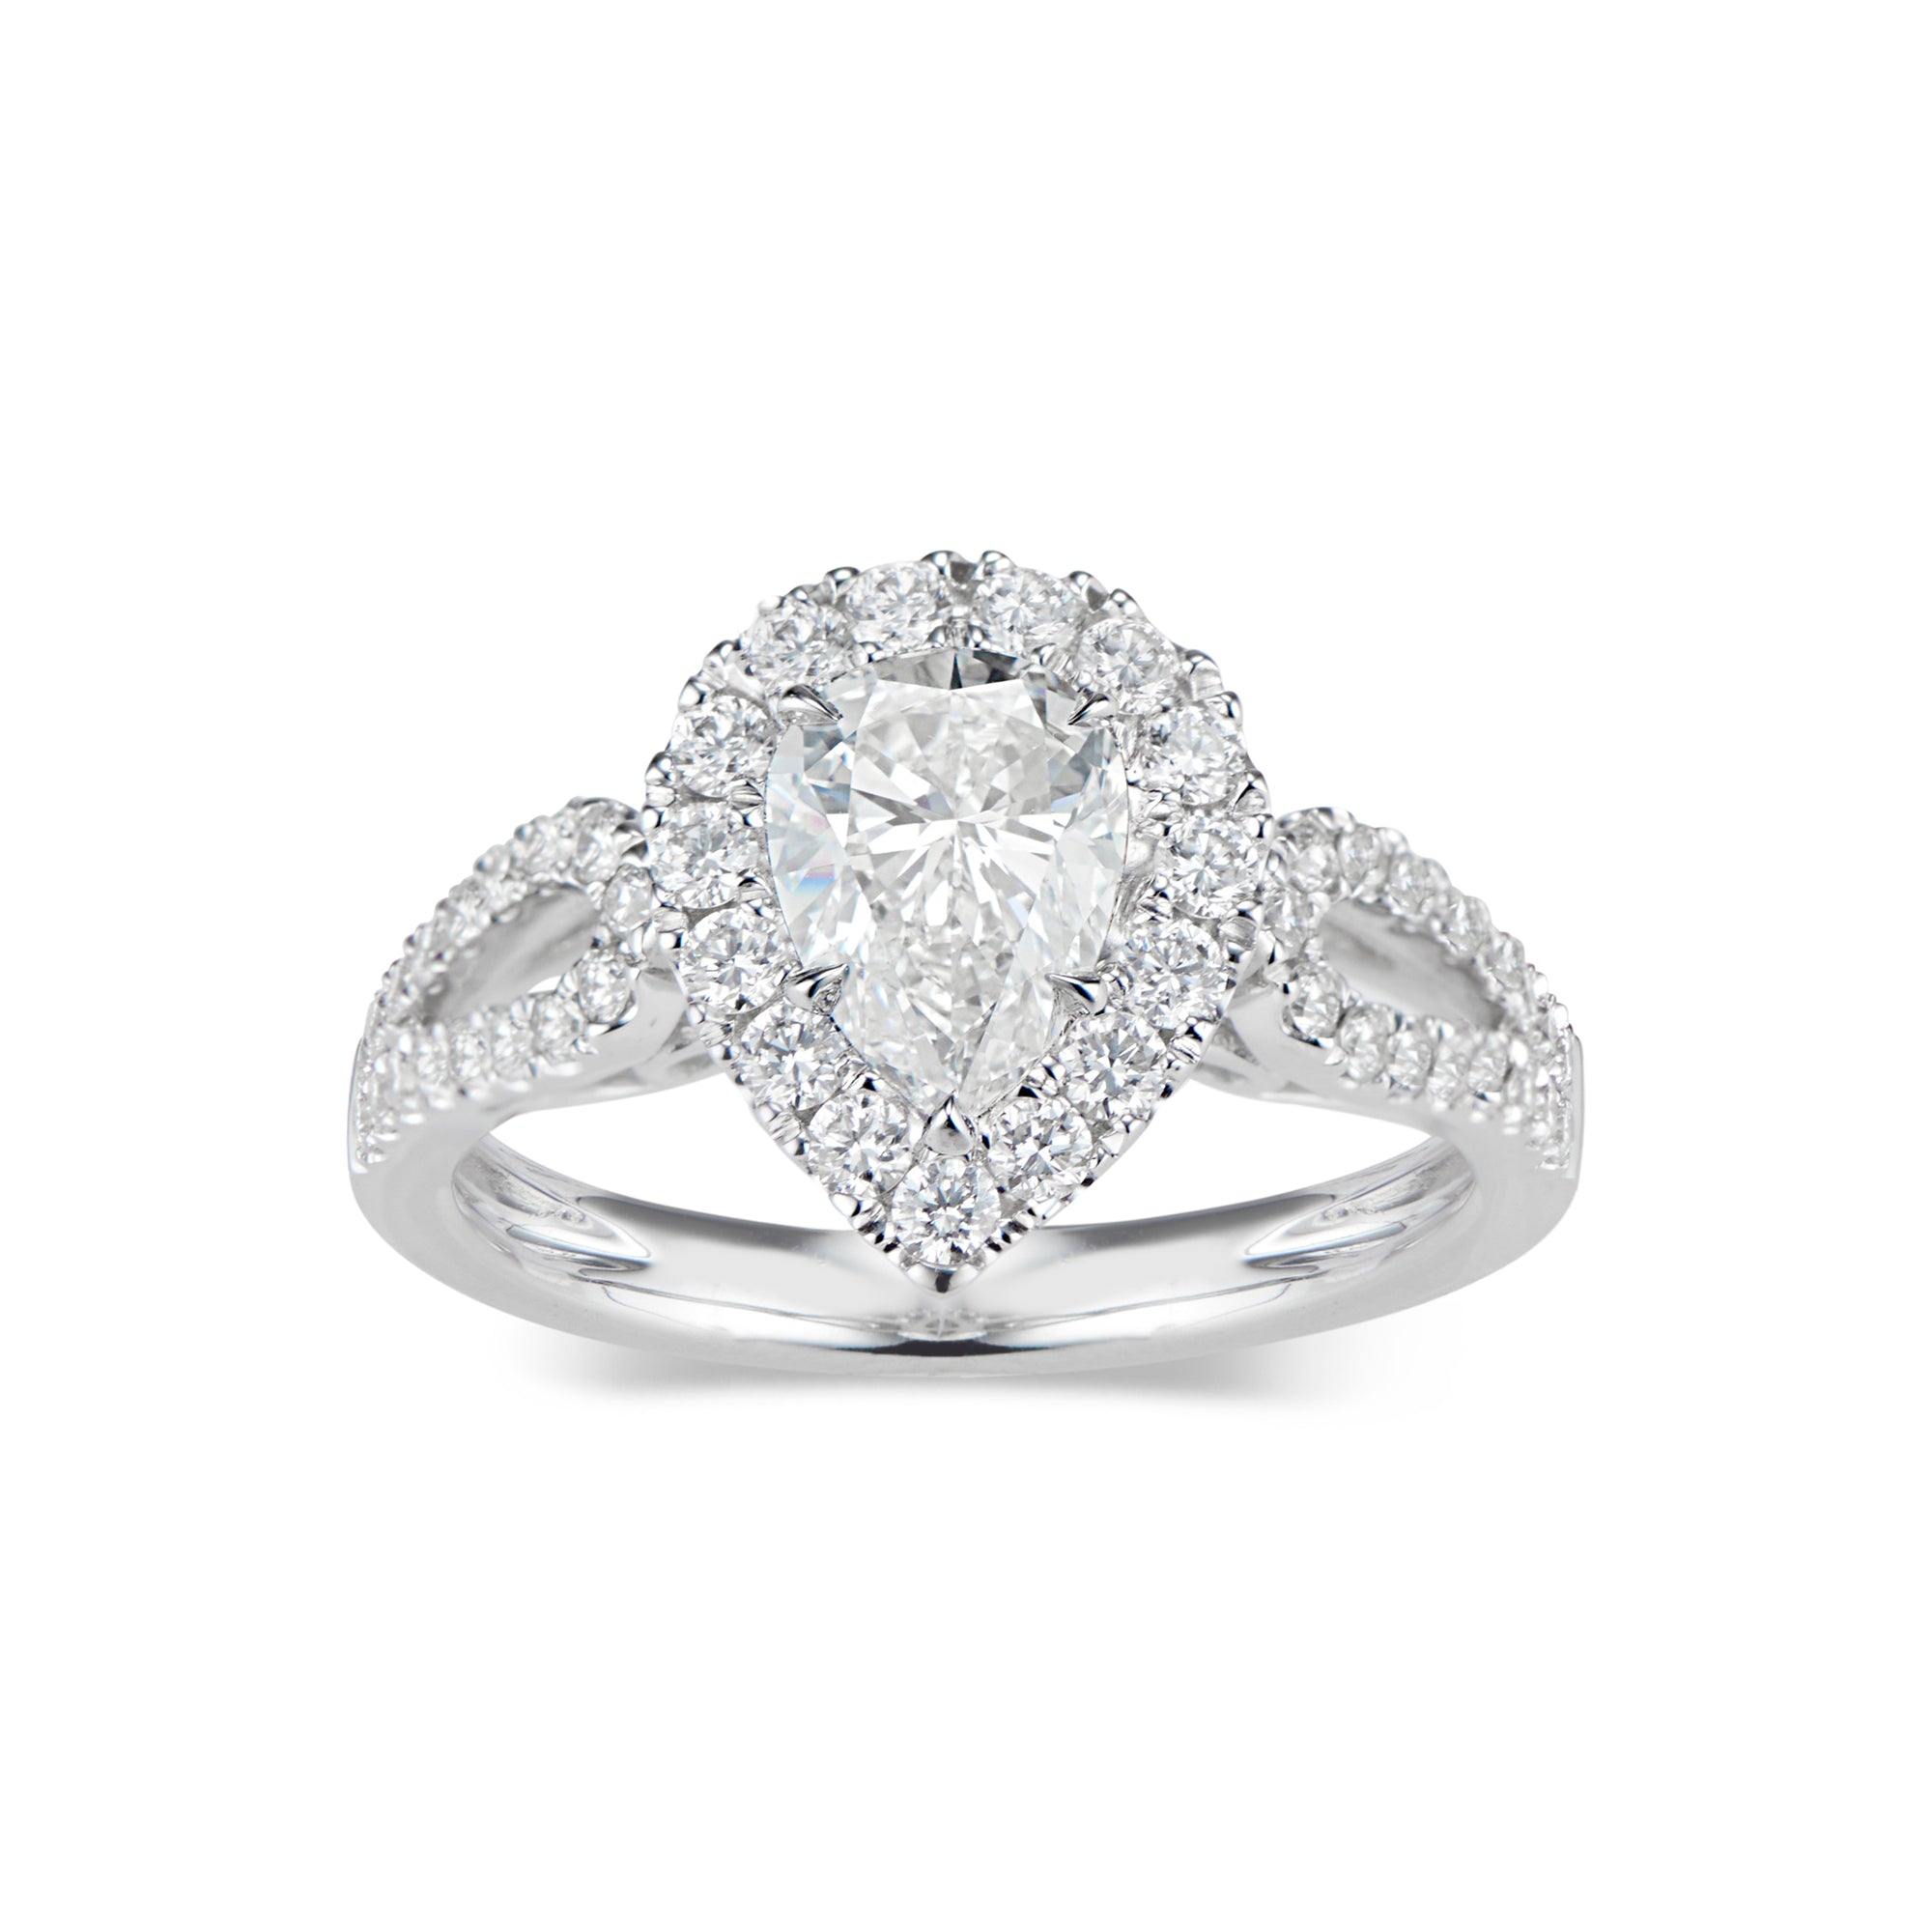 Pear Halo Diamond Engagement Ring with Open Loop Shank  -18K weighting 4.50 GR  - 49 round diamonds totaling 0.62 carats